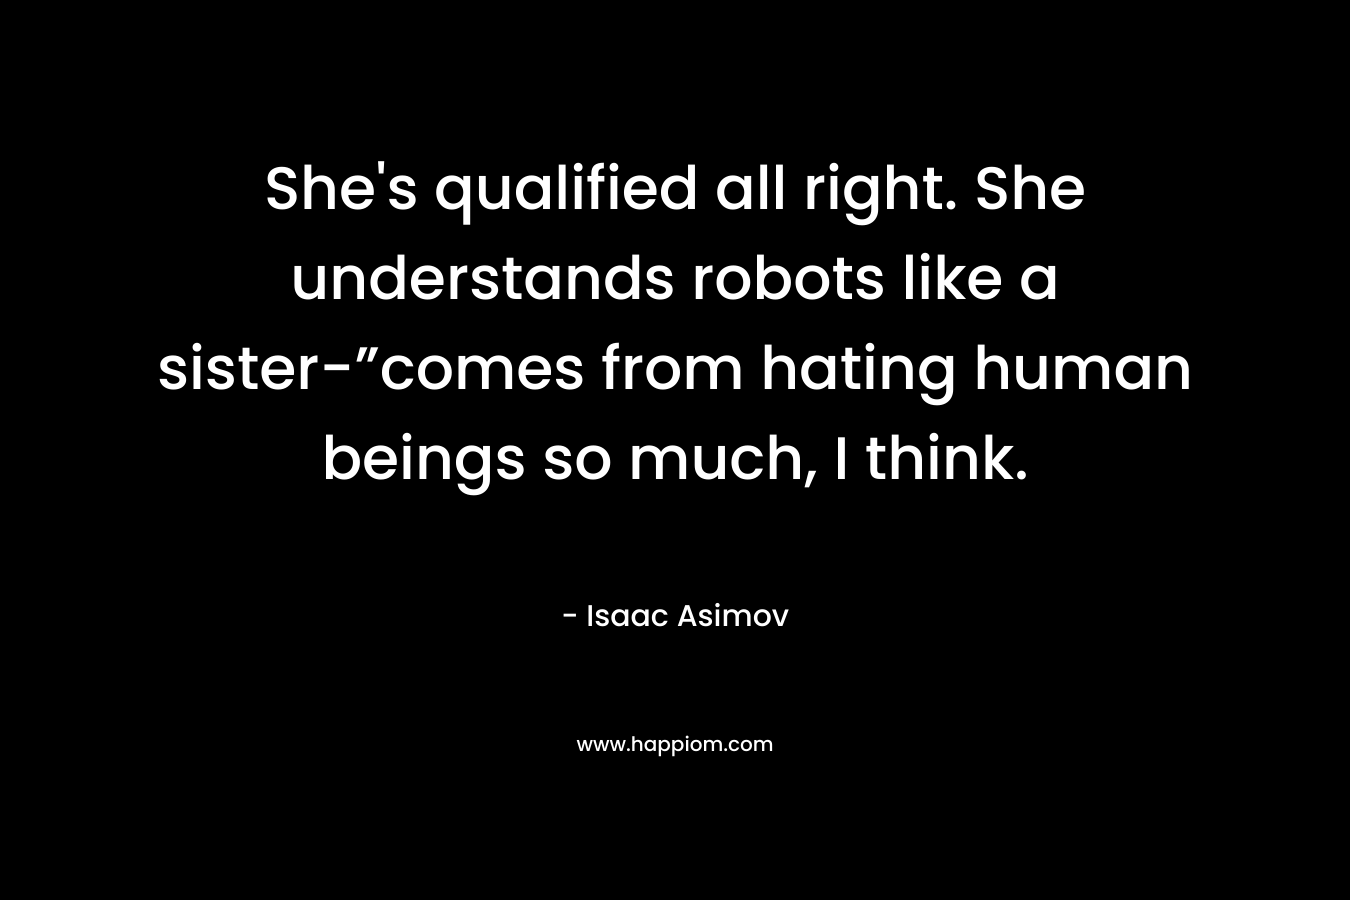 She’s qualified all right. She understands robots like a sister-”comes from hating human beings so much, I think. – Isaac Asimov